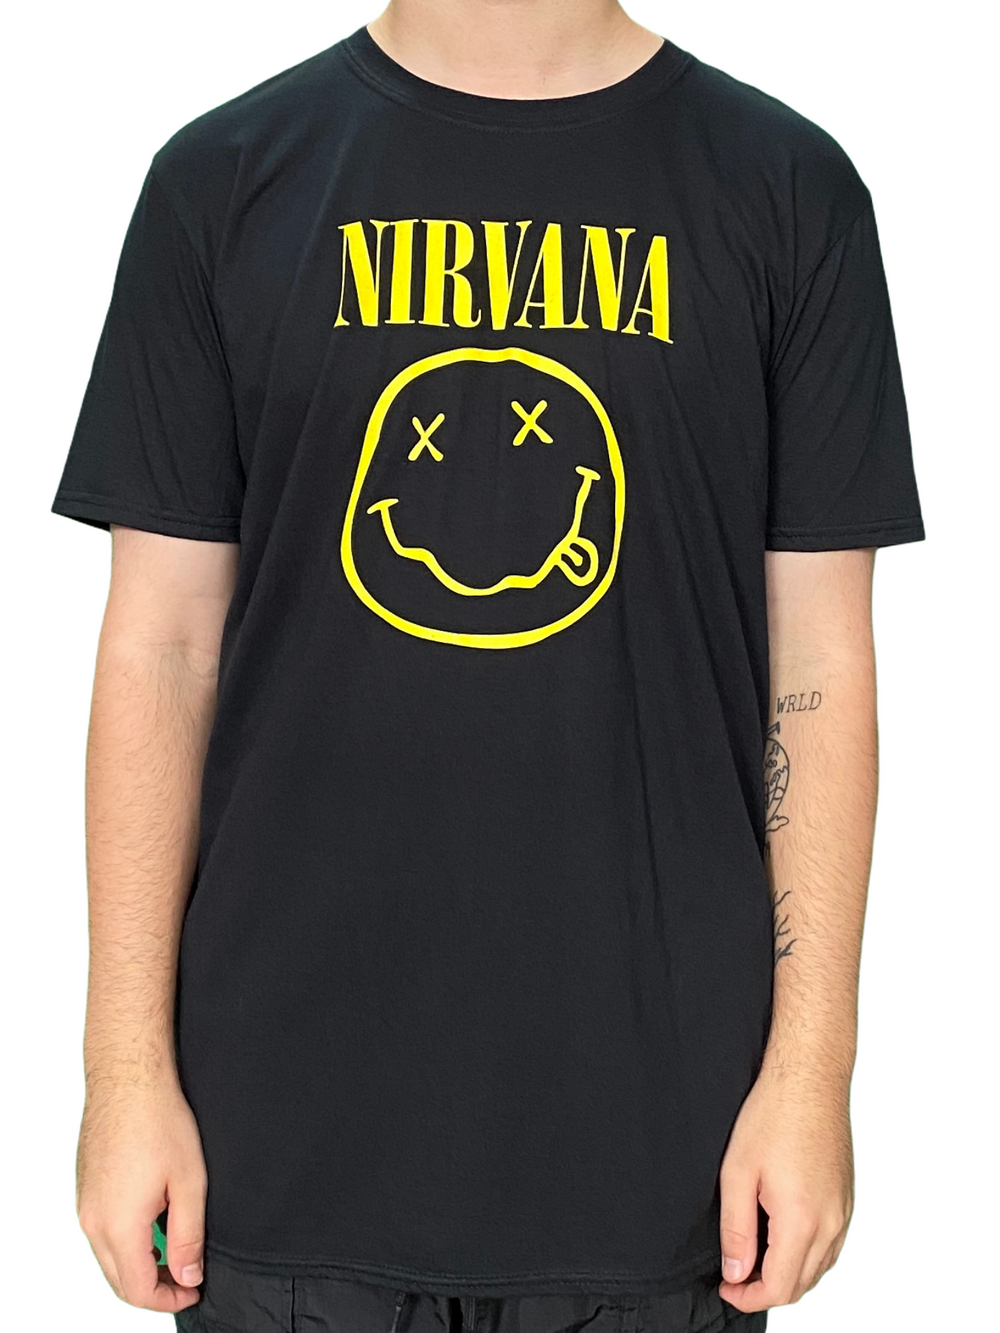 Nirvana Yellow Happy Face Unisex Official T Shirt Brand New Various Sizes NO BACK PRINT